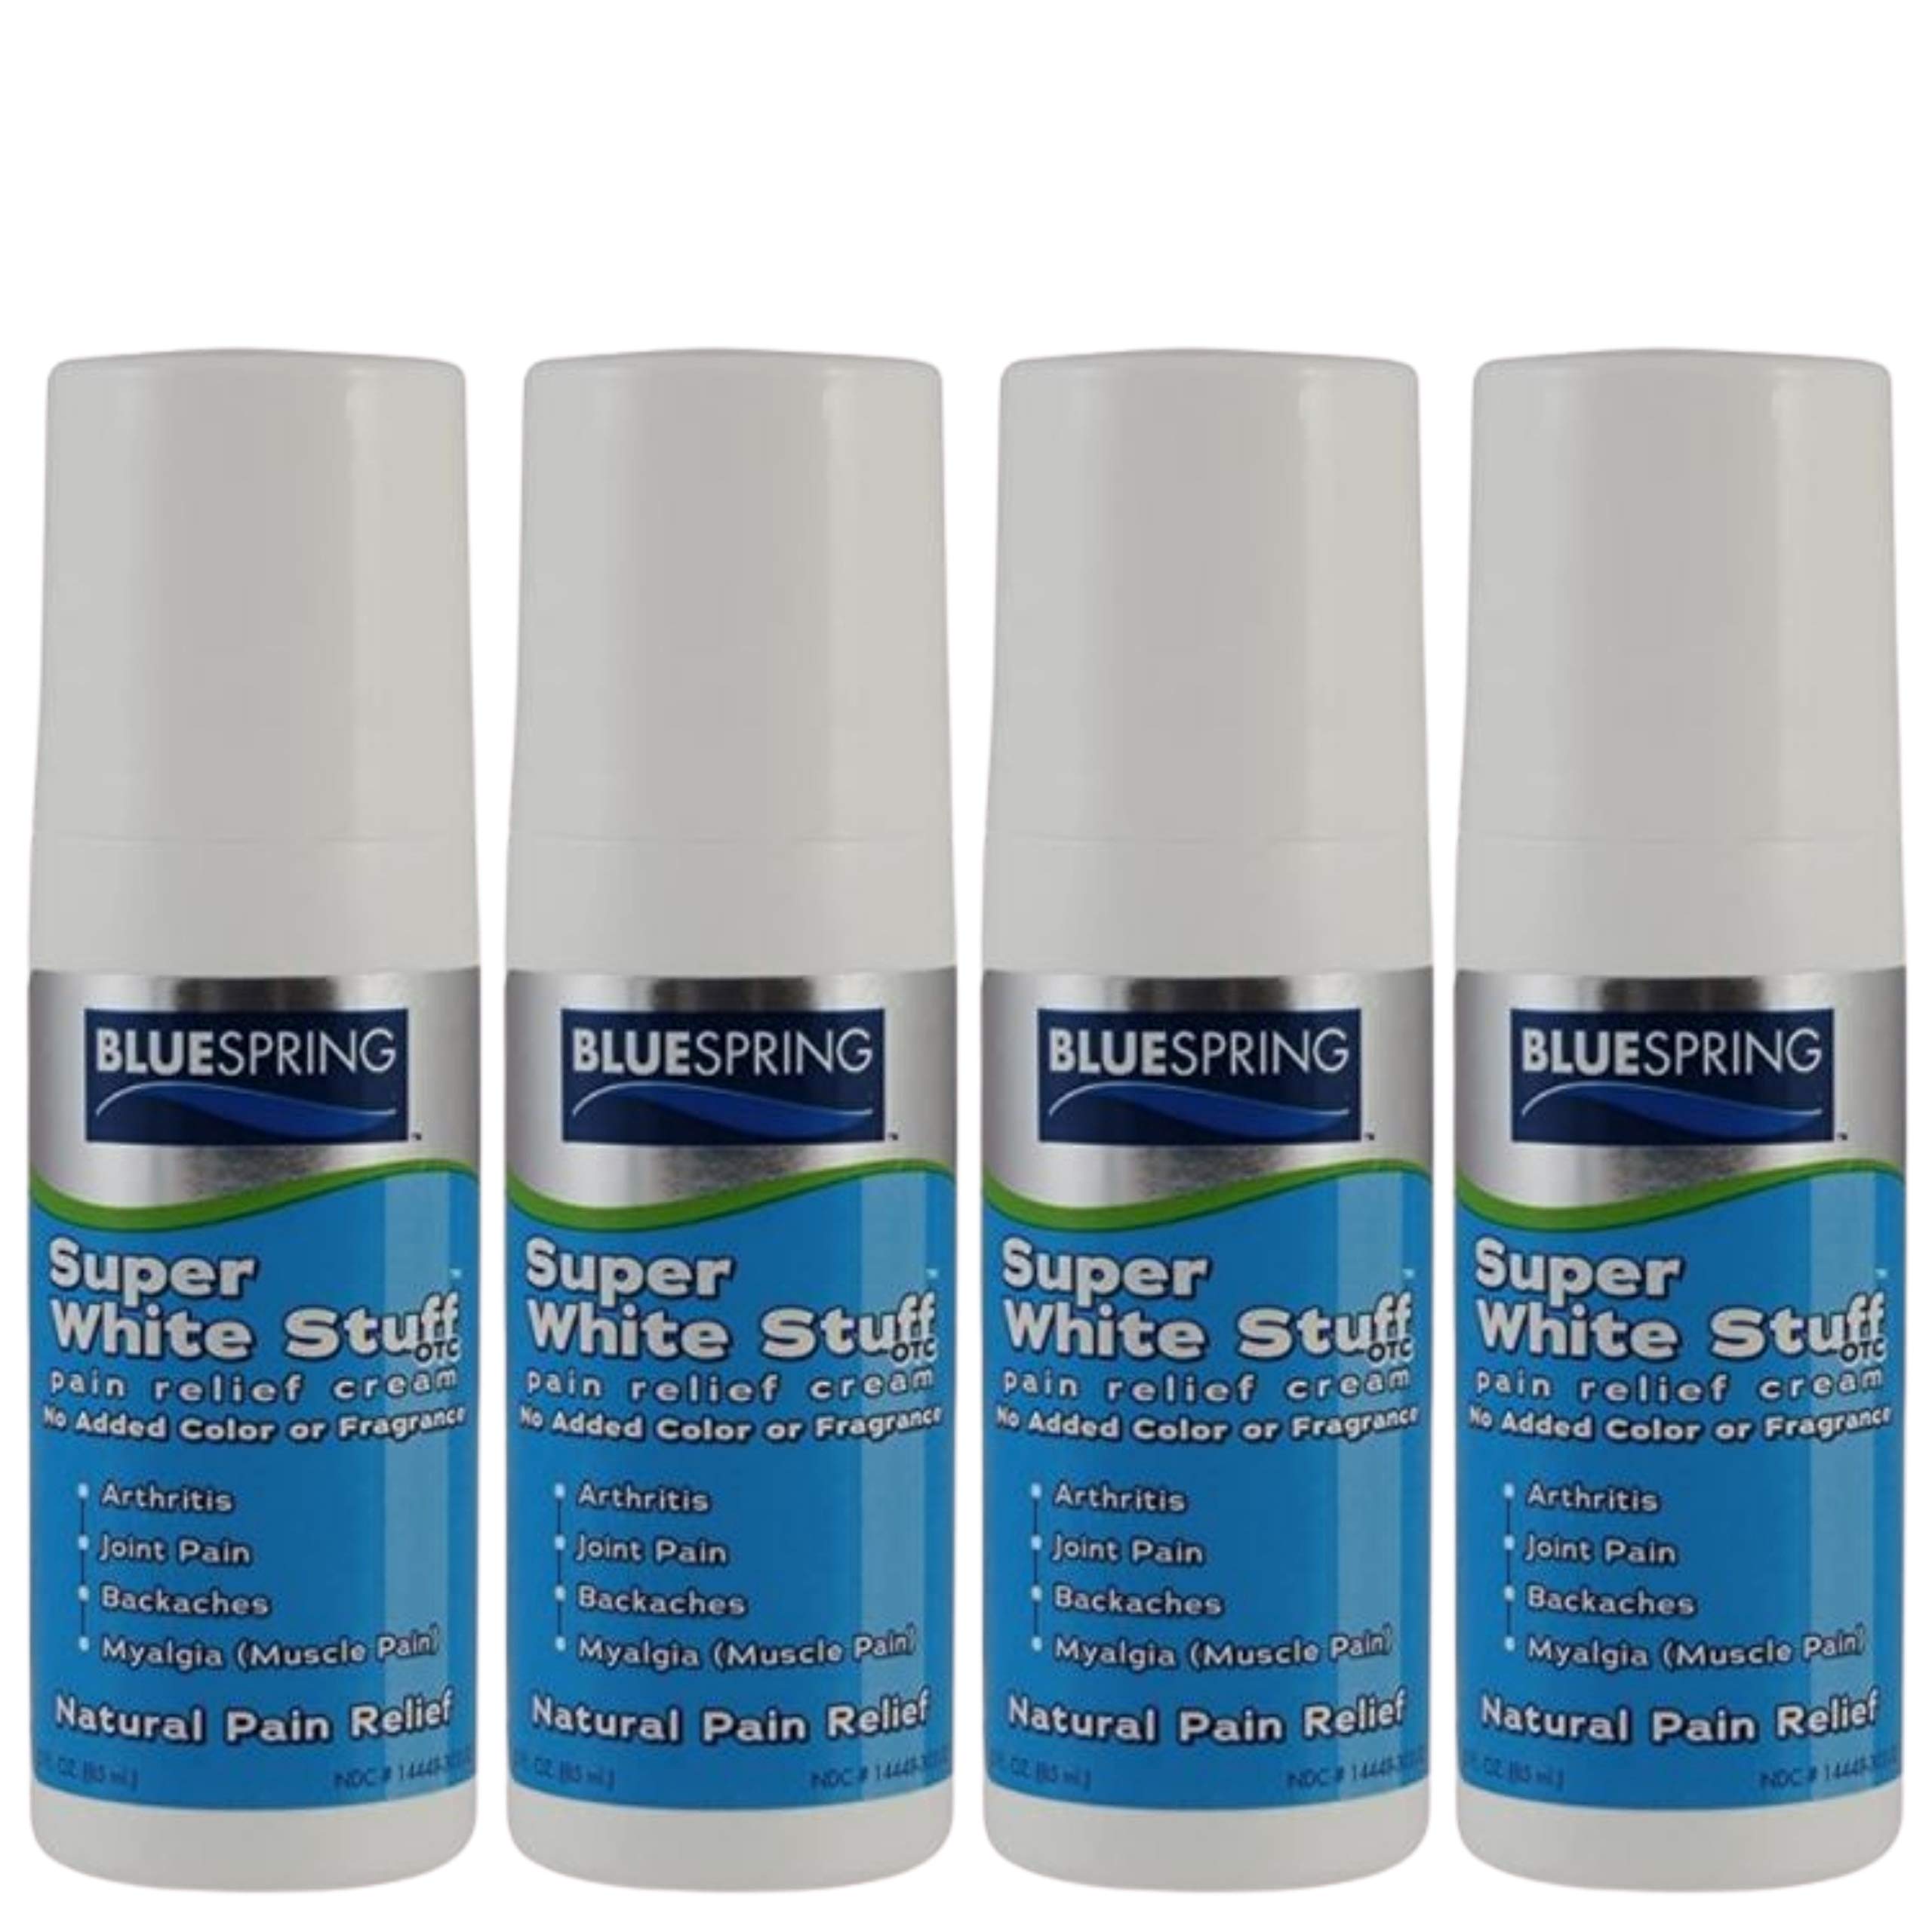 Bluespring Pain Relief roll-on Cream with Emu Oil - [3Oz] Super White Stuff Pain Reliever rub - No Fragrance Extra Strength Formula - Best for Knee...